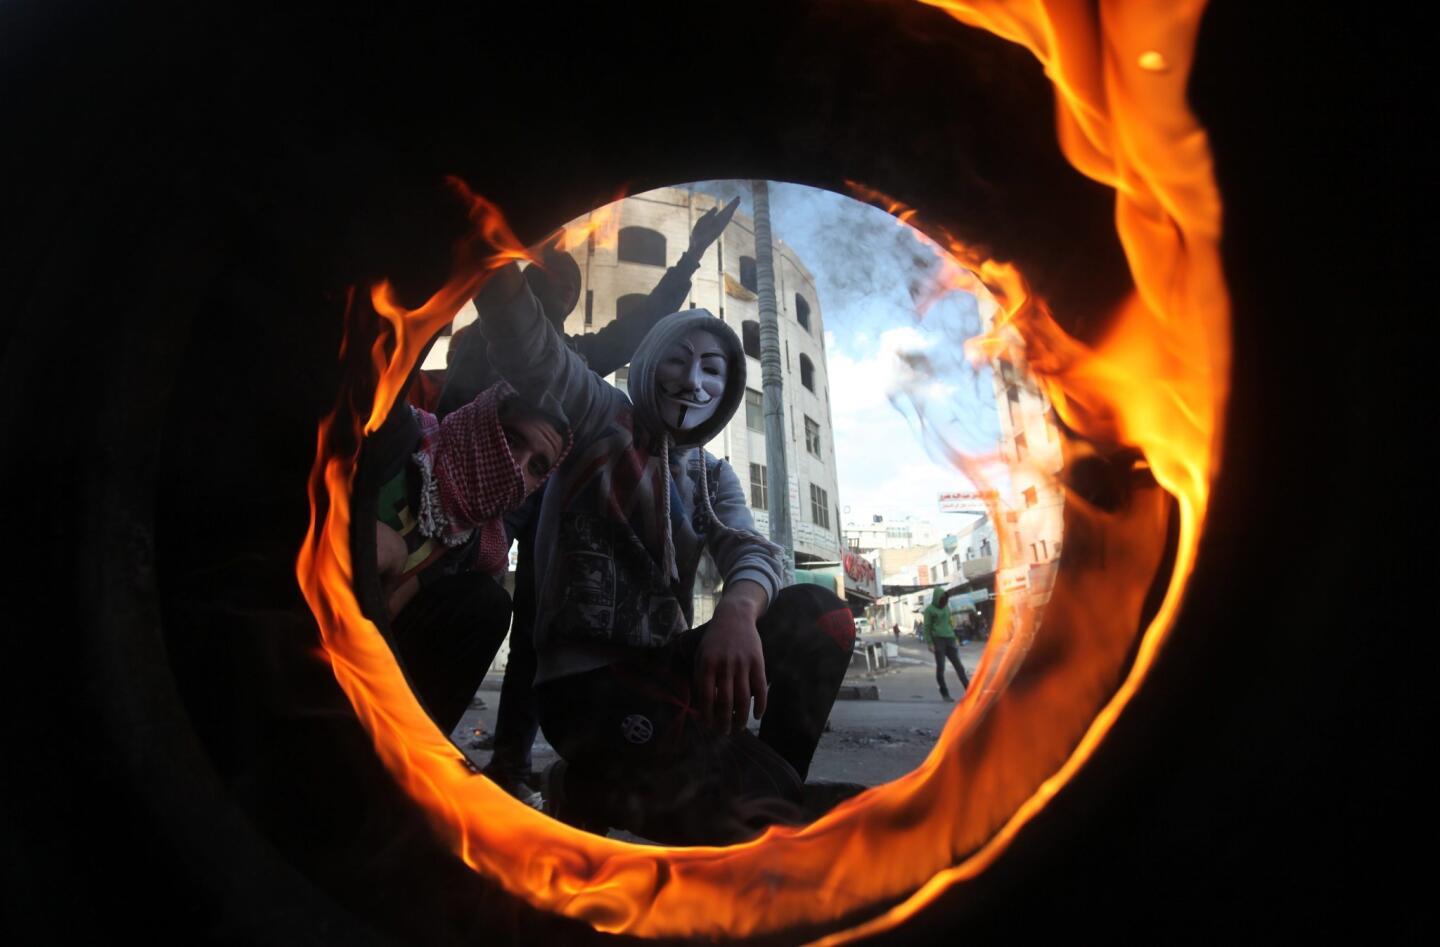 A Palestinian protester in a Guy Fawkes mask is seen through a burning tire during clashes with Israeli security forces after the funeral for a slain Palestinian in the West Bank city of Hebron.